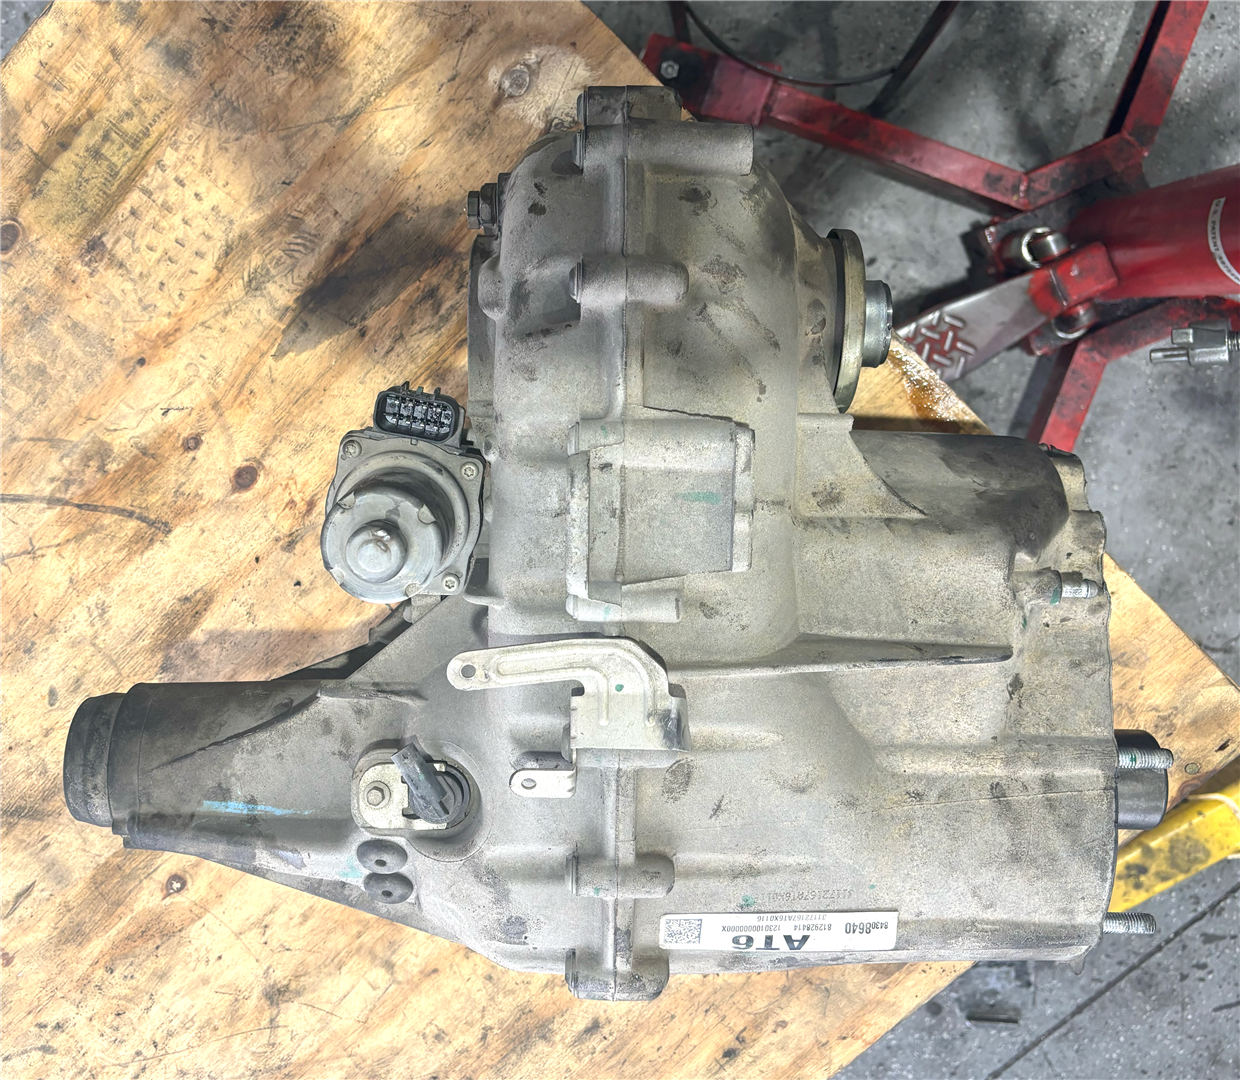 How to Troubleshoot Transfer Cases